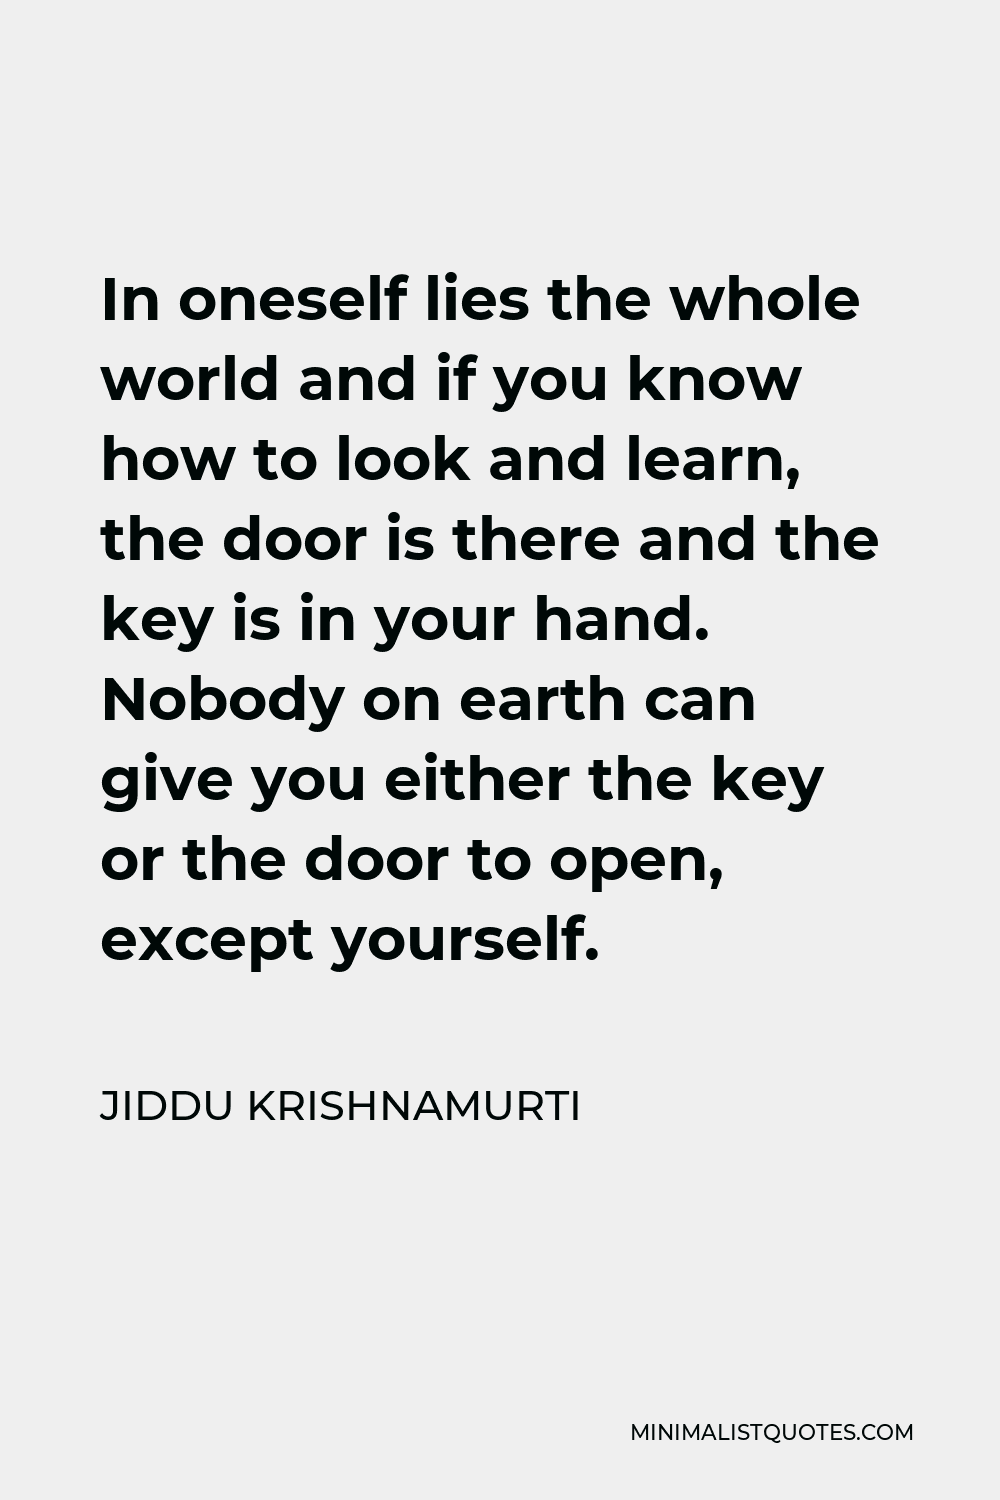 Jiddu Krishnamurti Quote - In oneself lies the whole world and if you know how to look and learn, the door is there and the key is in your hand. Nobody on earth can give you either the key or the door to open, except yourself.